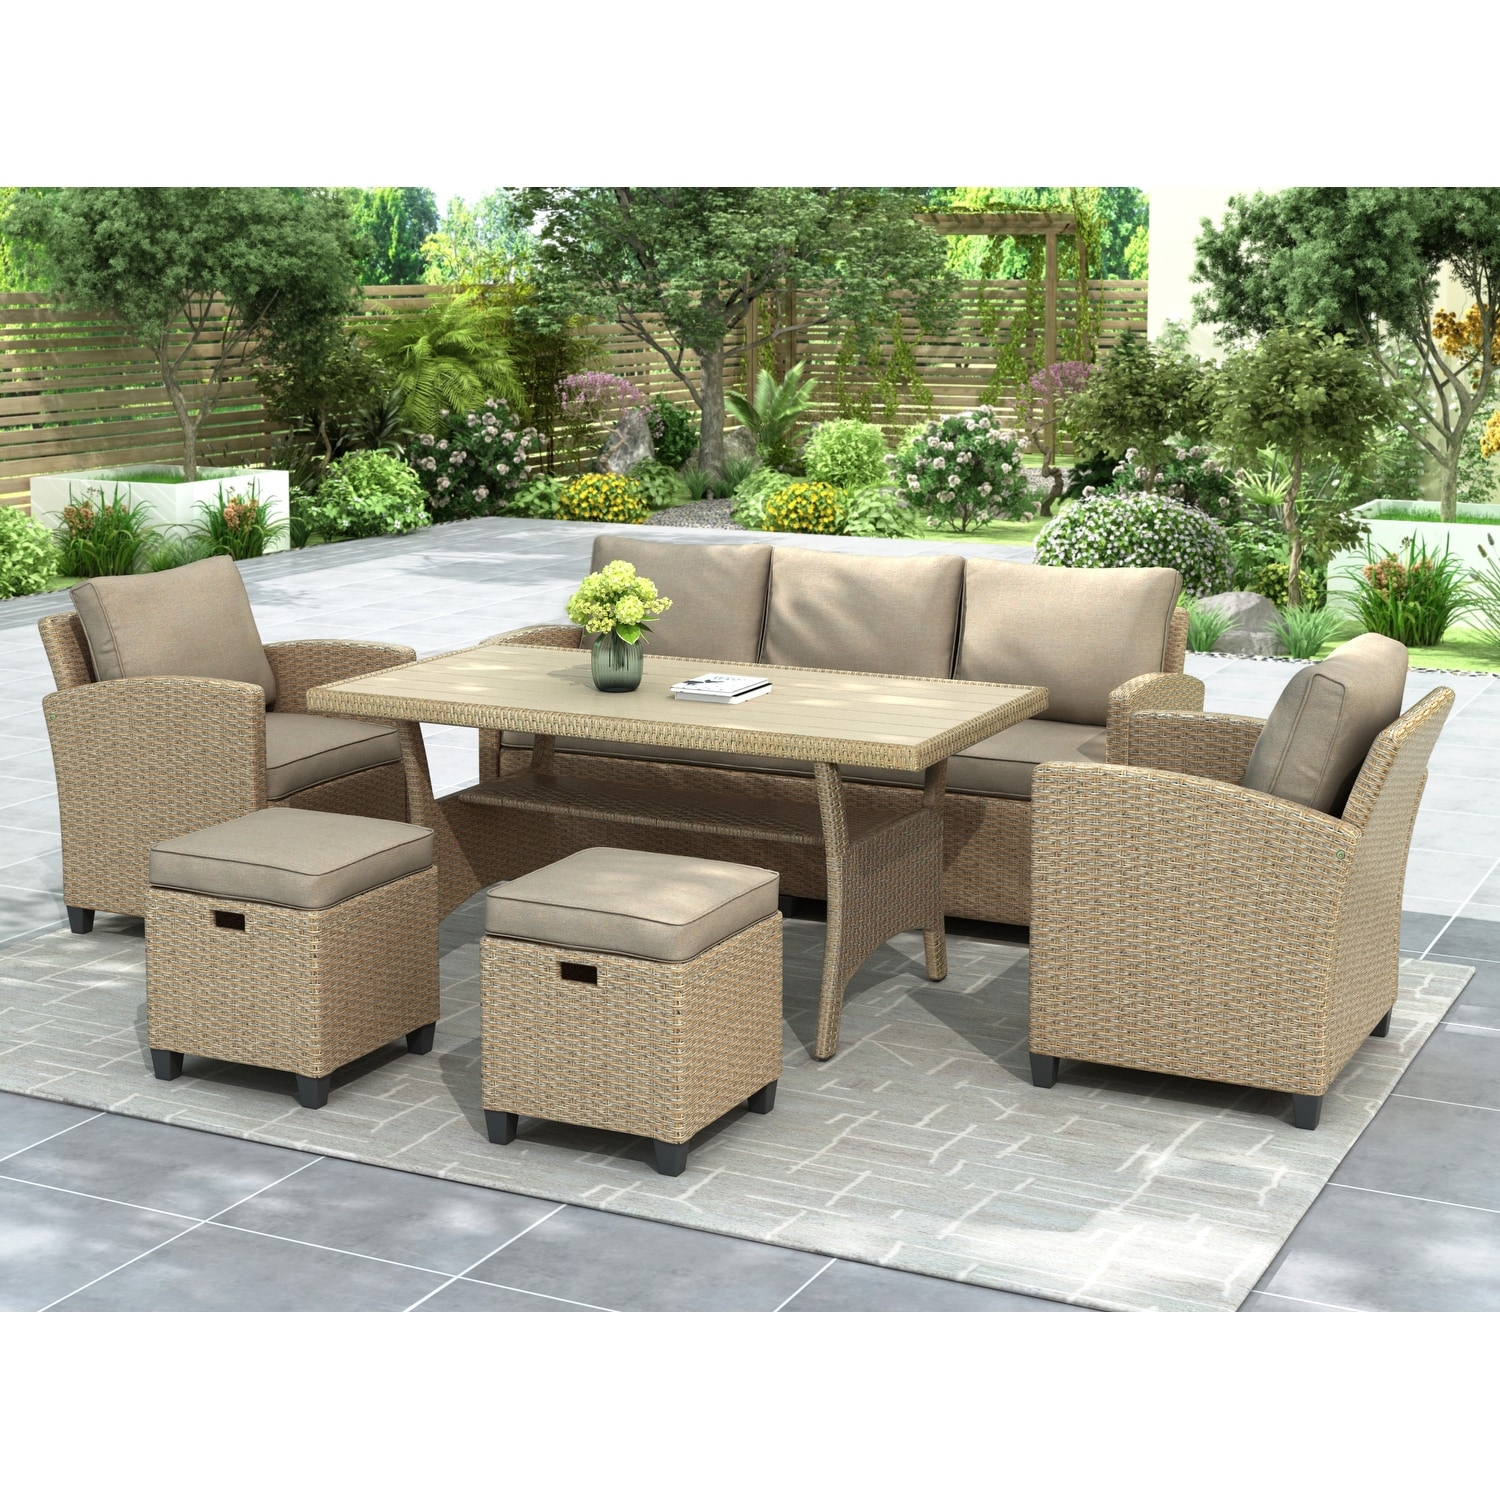 6-piece Outdoor Patio Furniture Set  Outdoor Pe Rattan Wicker Sofa Set  All-weather Conversation Furniture Set With Stools